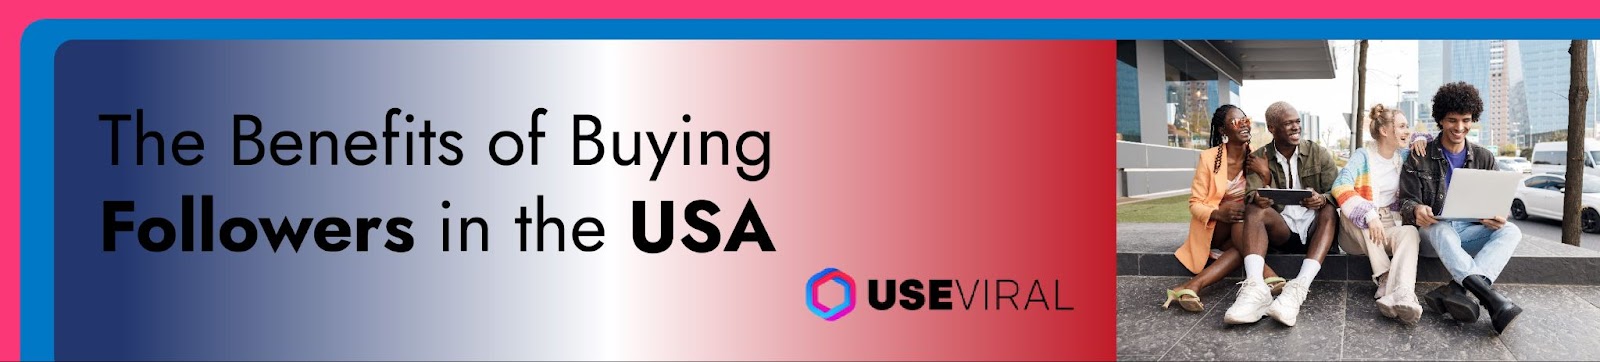 The Benefits of Buying Followers in the USA